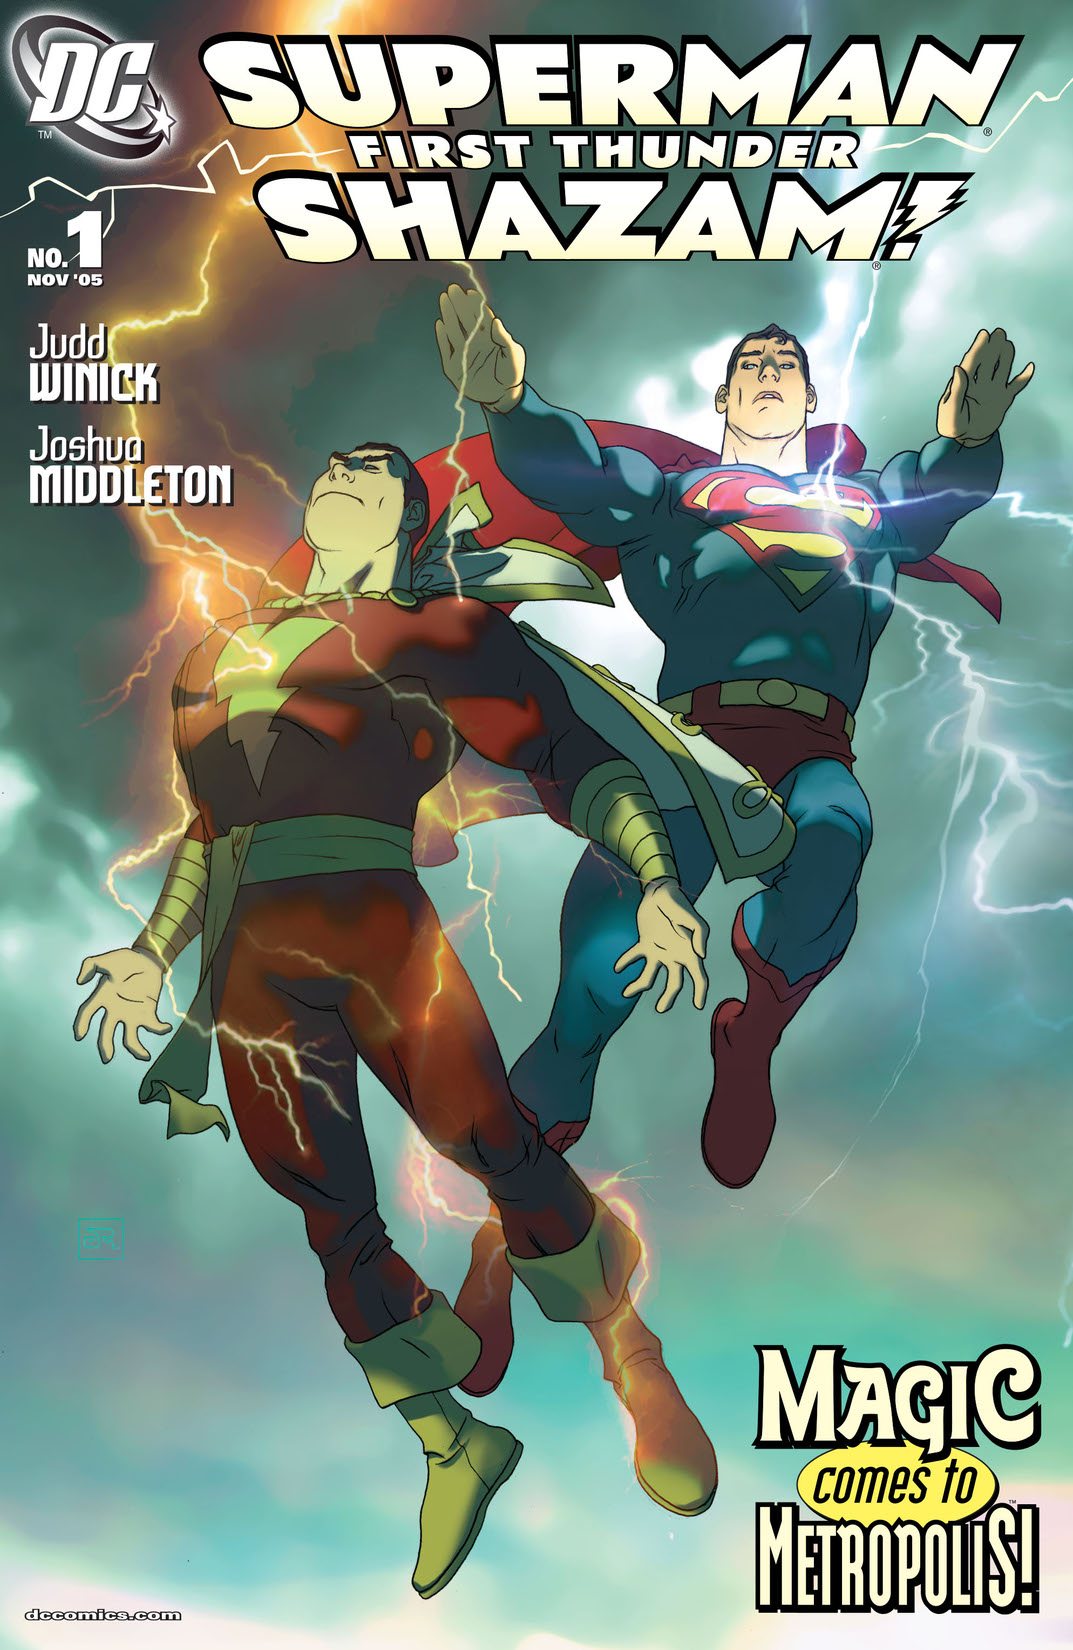 Superman/Shazam!: First Thunder #1 preview images